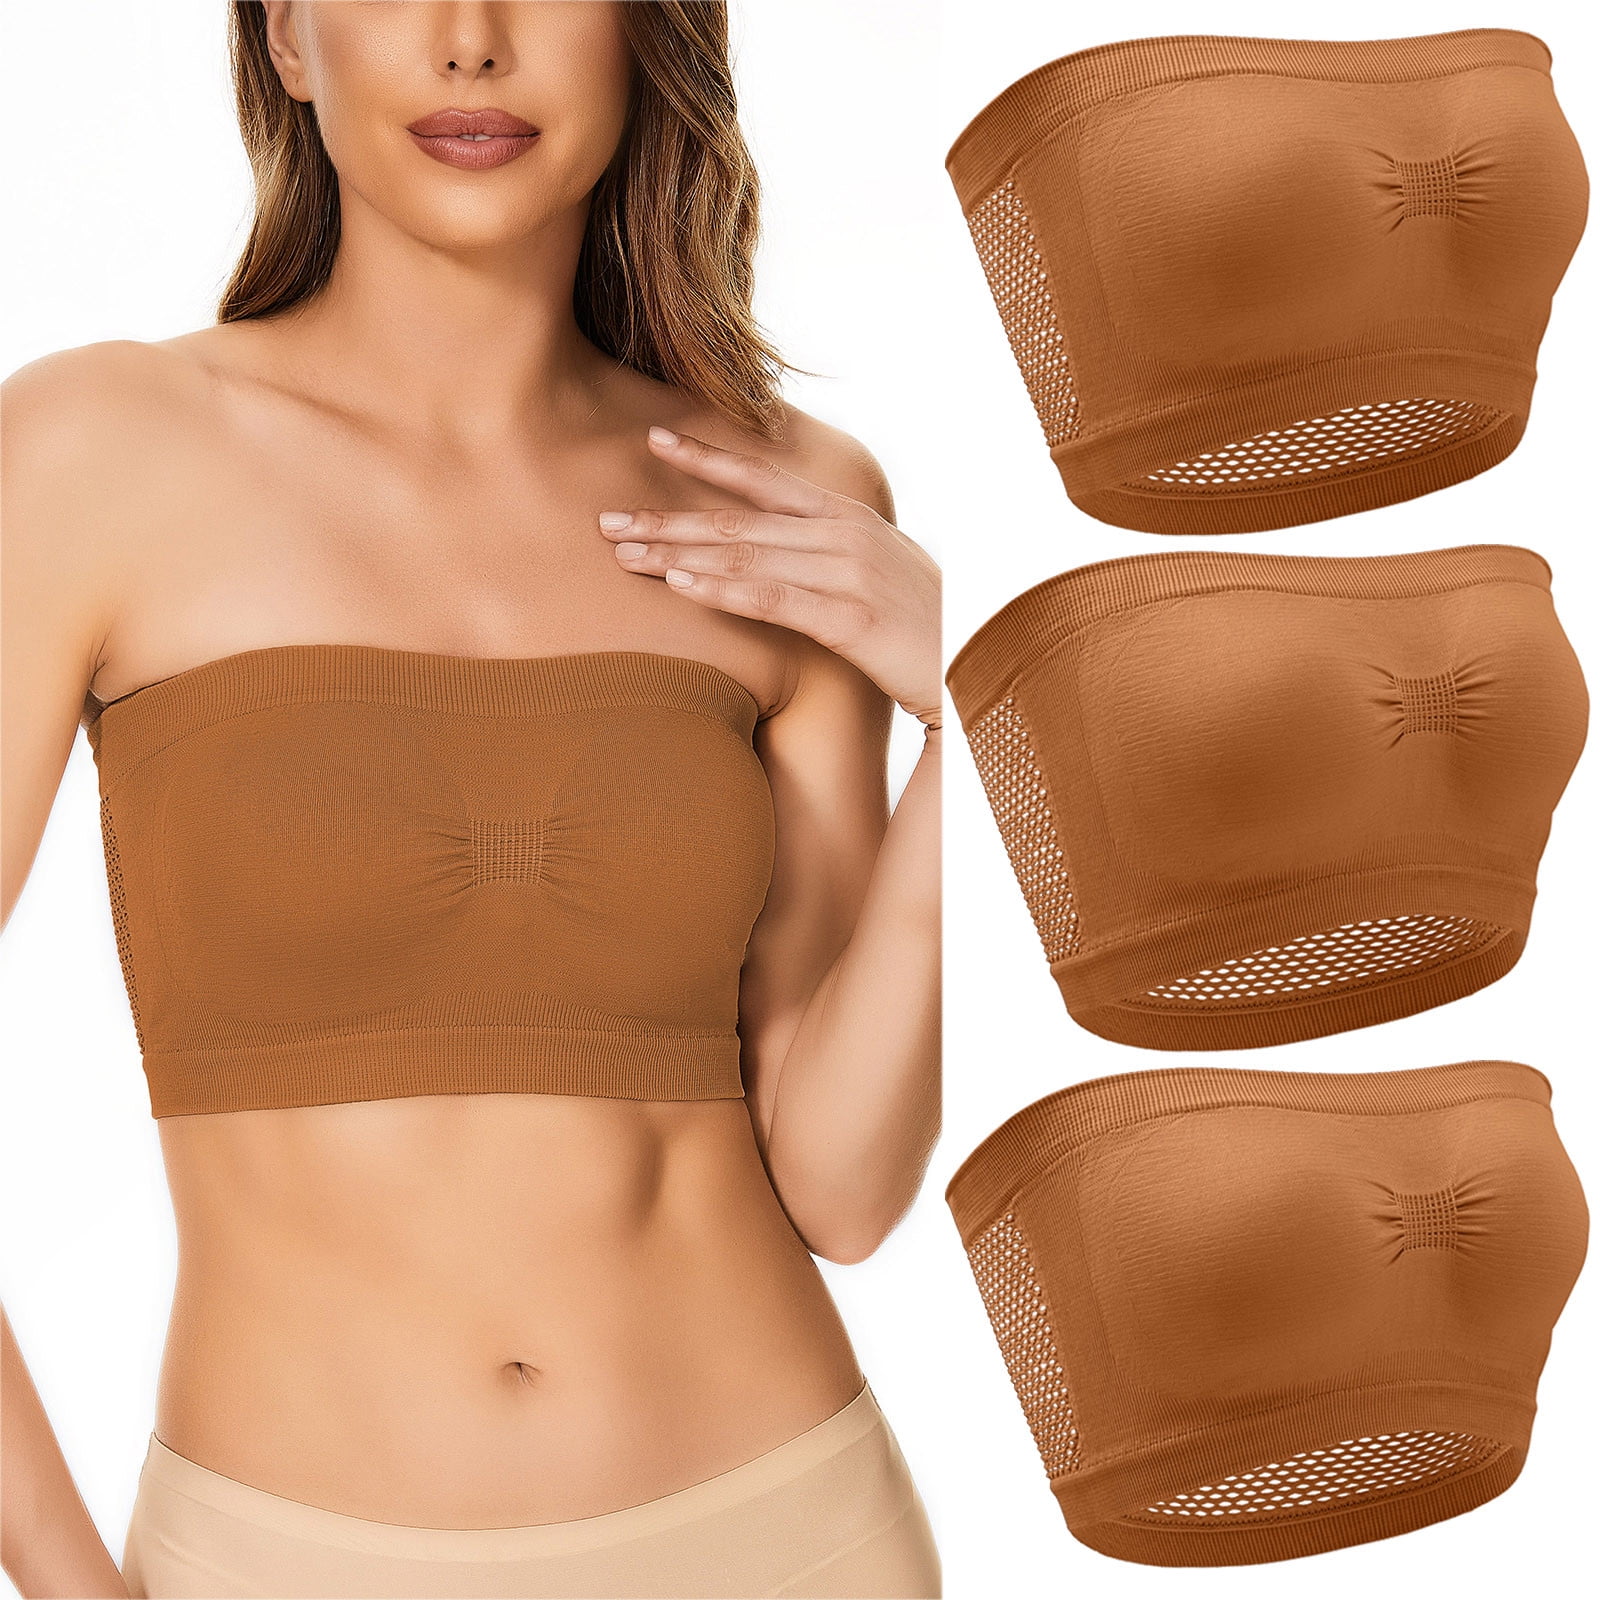 LBECLEY Body Com Dresses Women Women Lace Bra Strapless Satin Tube Top Crop  Bustier Top Sheer Casual Blouse Tops Mini Bustier Double Compression